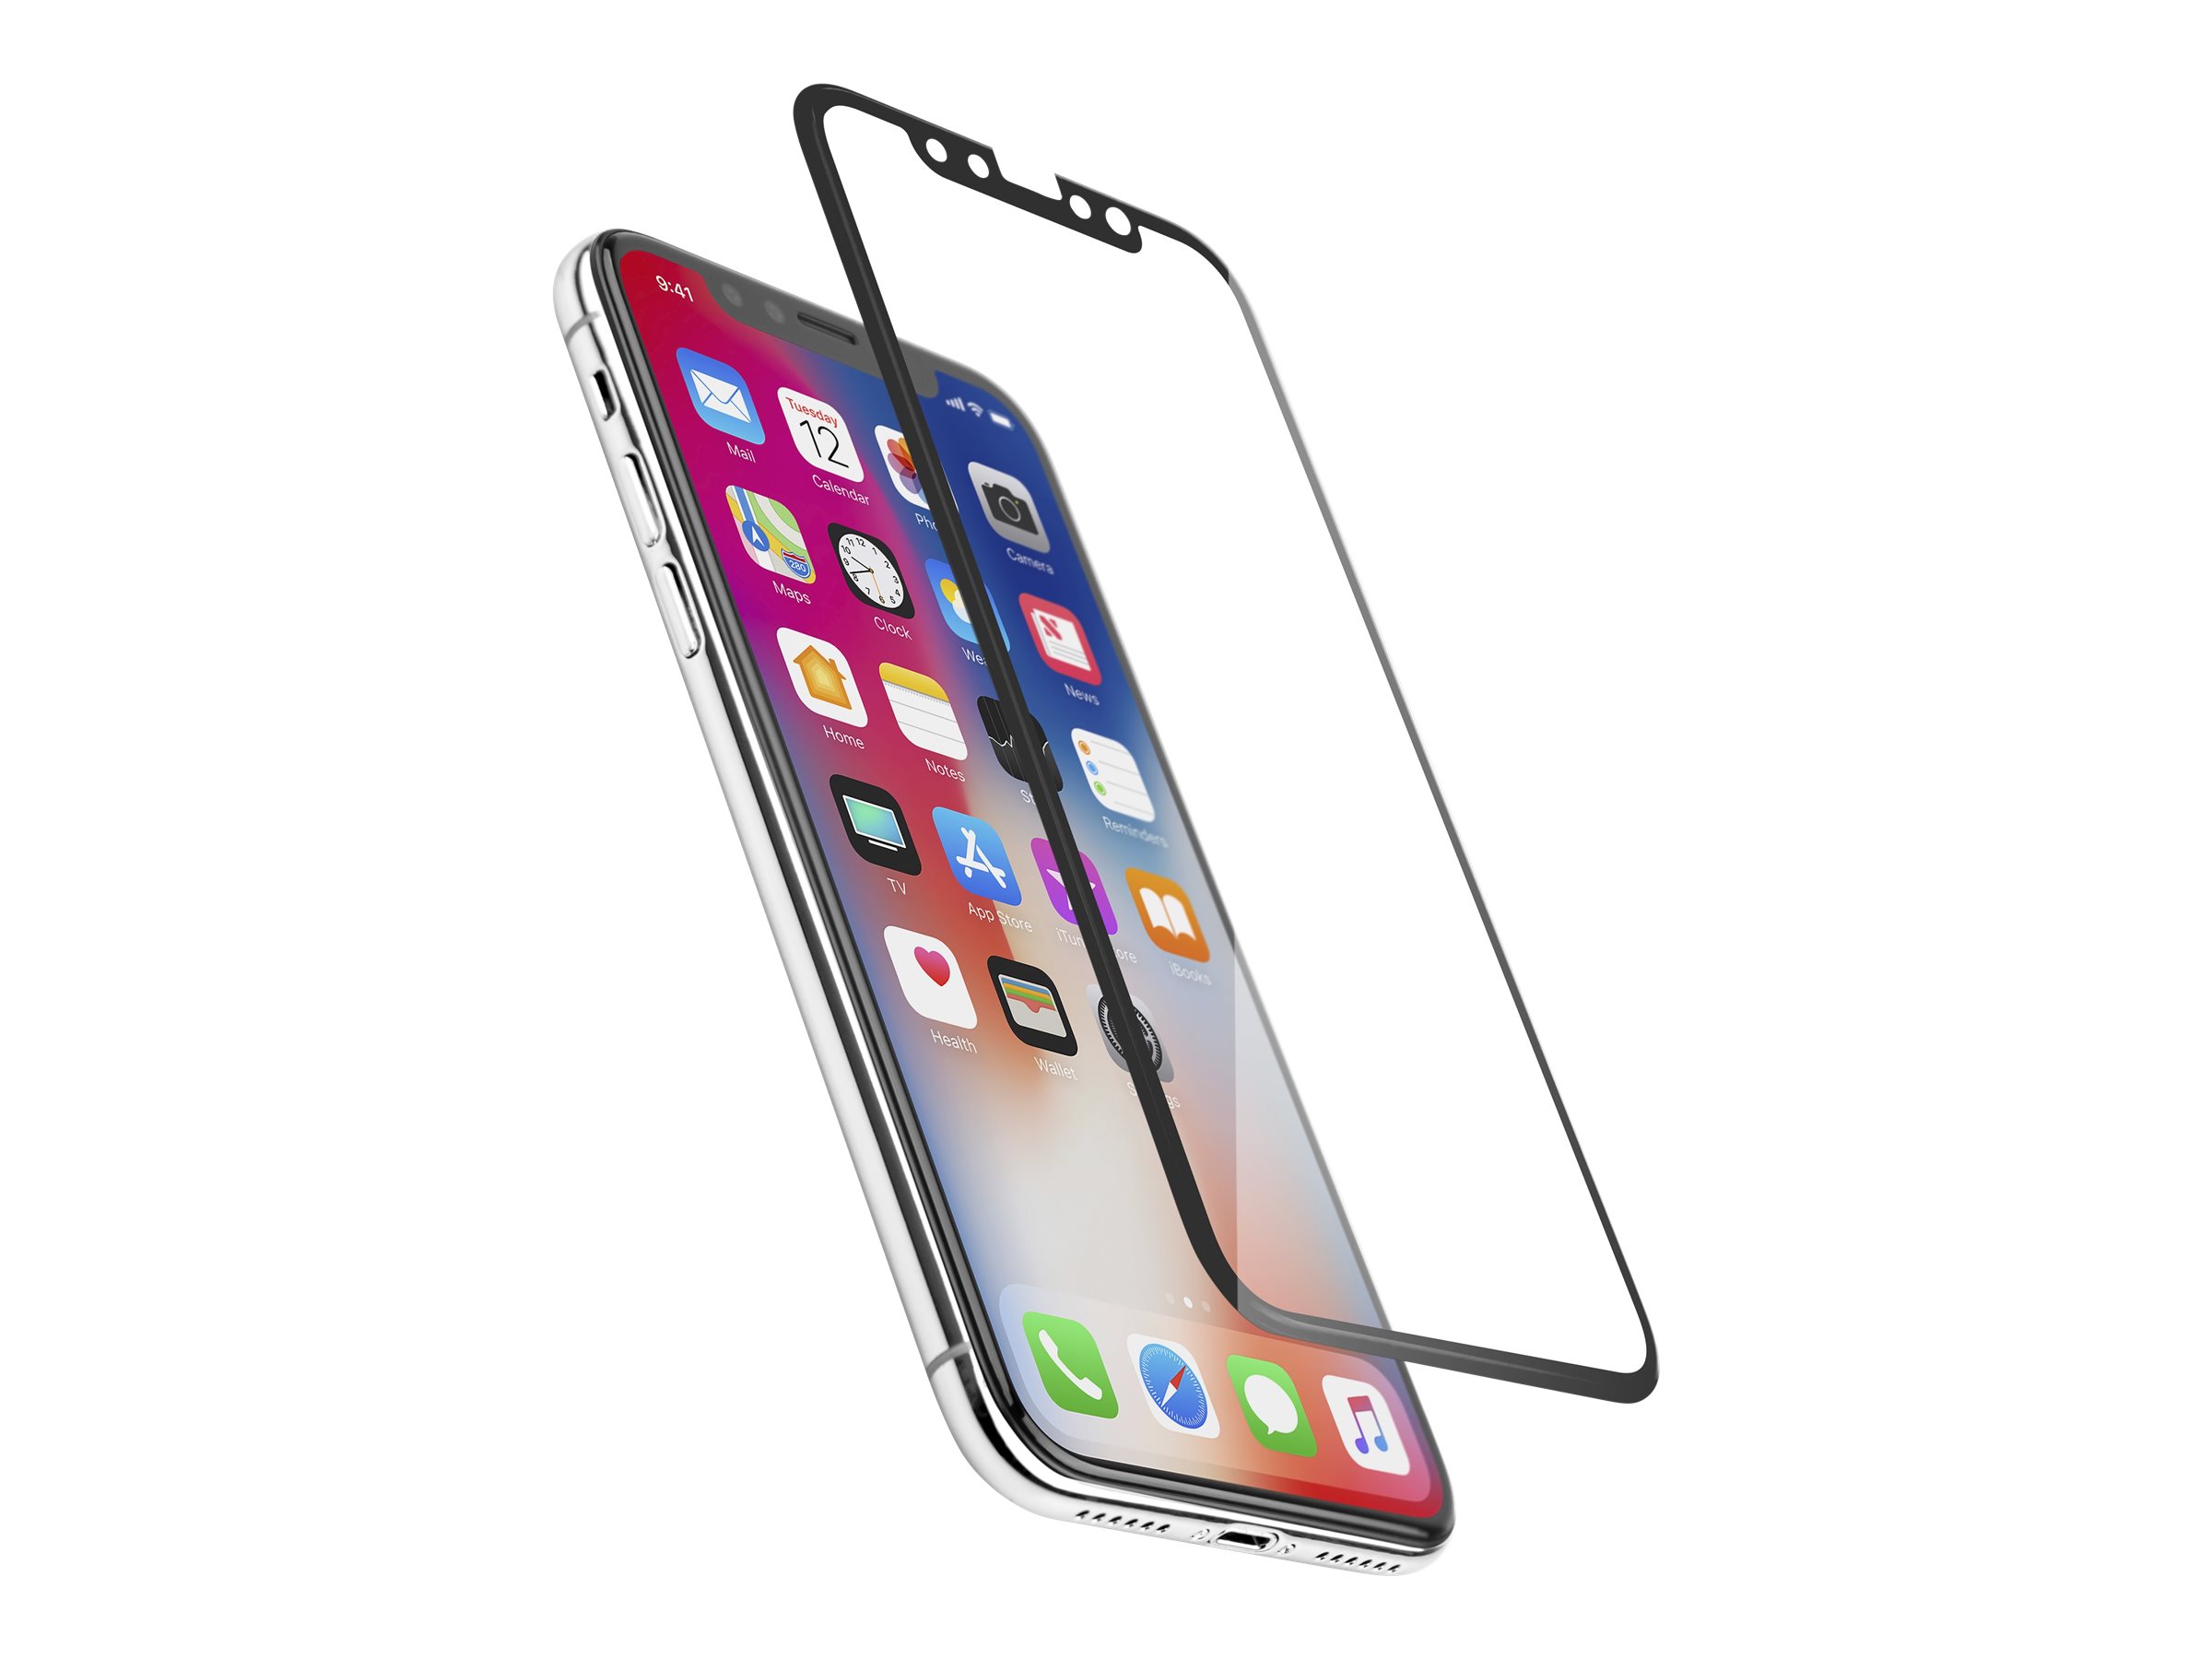 Furo Glass Screen Protector for iPhone 11 Pro - FT8179